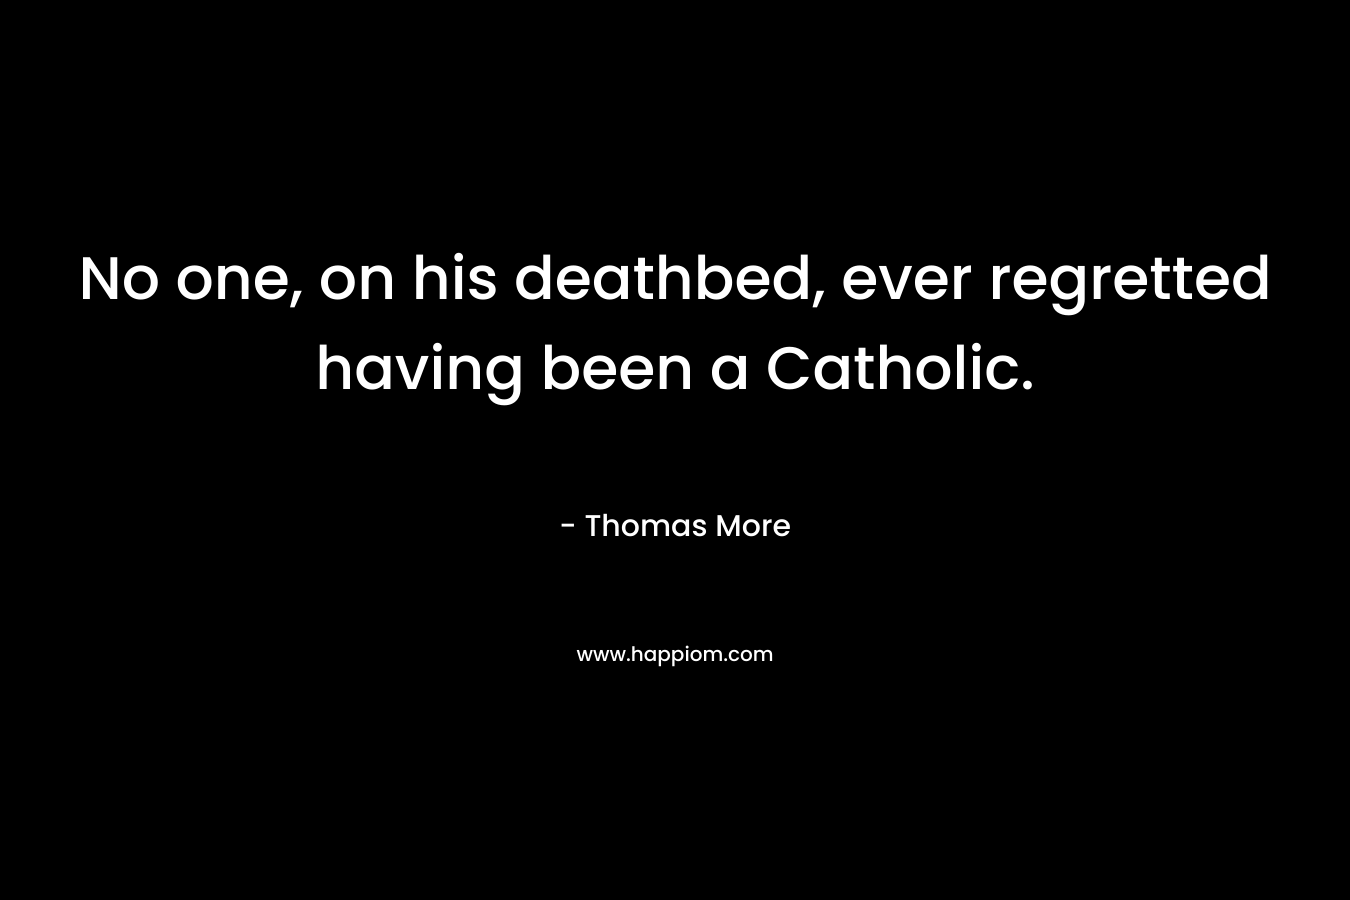 No one, on his deathbed, ever regretted having been a Catholic.